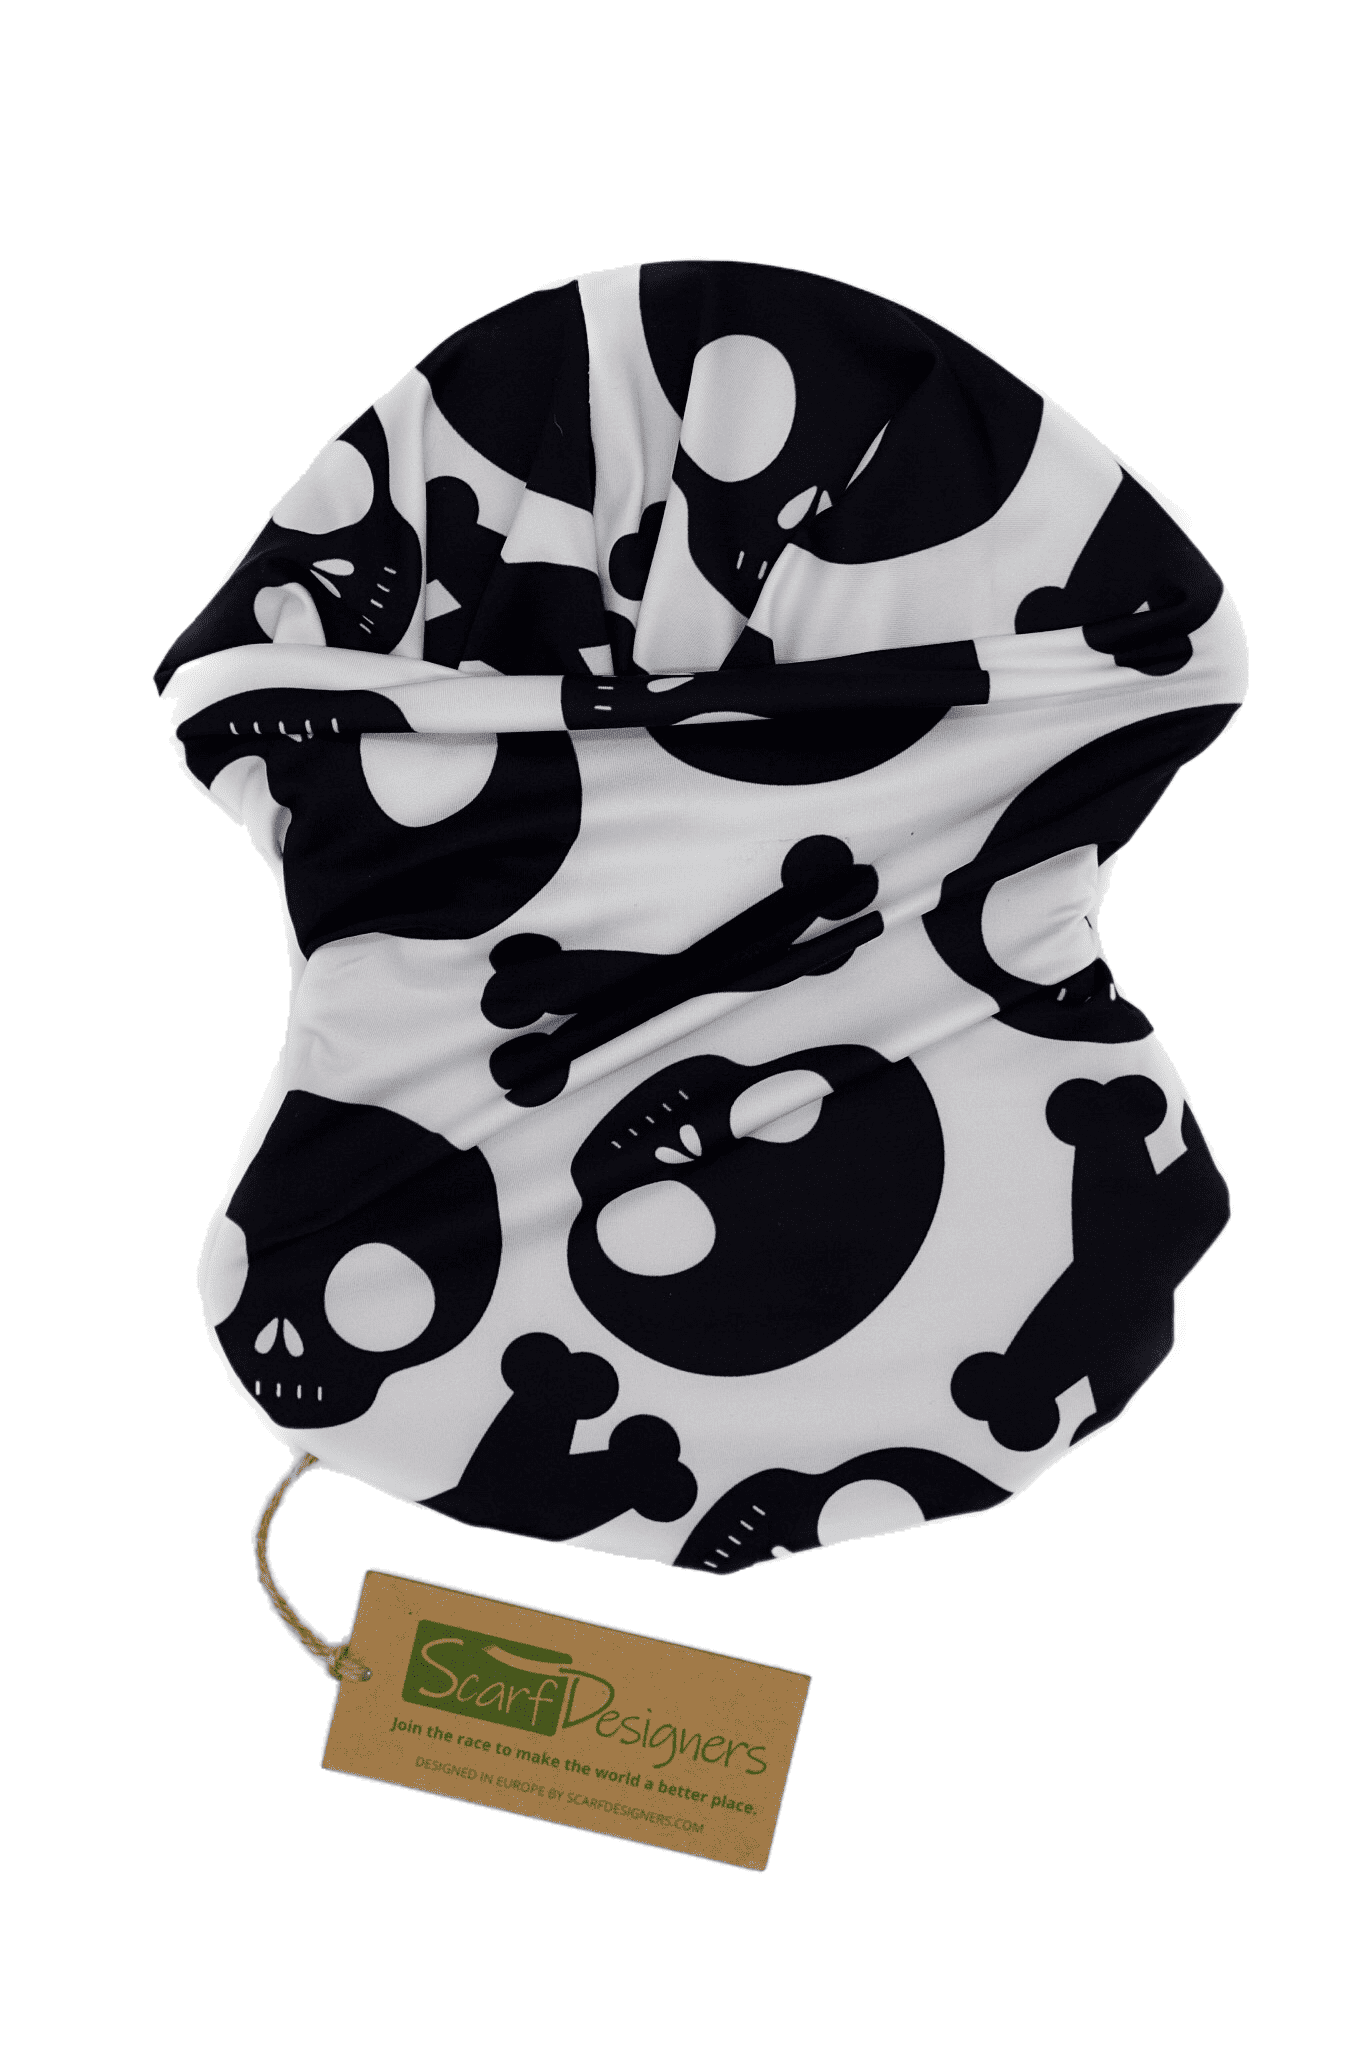 This is a unisex, multifunctional and sustainable bandana with a skull design in white and black. It is made from recycled polyester which is breathable, durable, soft to touch, easy to care and fast drying material. It makes it perfectly suitable for all kinds of sports like biking, hiking, jogging or skiing. This is a versatile bandana that can be used as a scarf, face mask, bandana or headband and it is also known as tube scarf, neck gaiter or face mask. It is a vegan product certified by PETA.